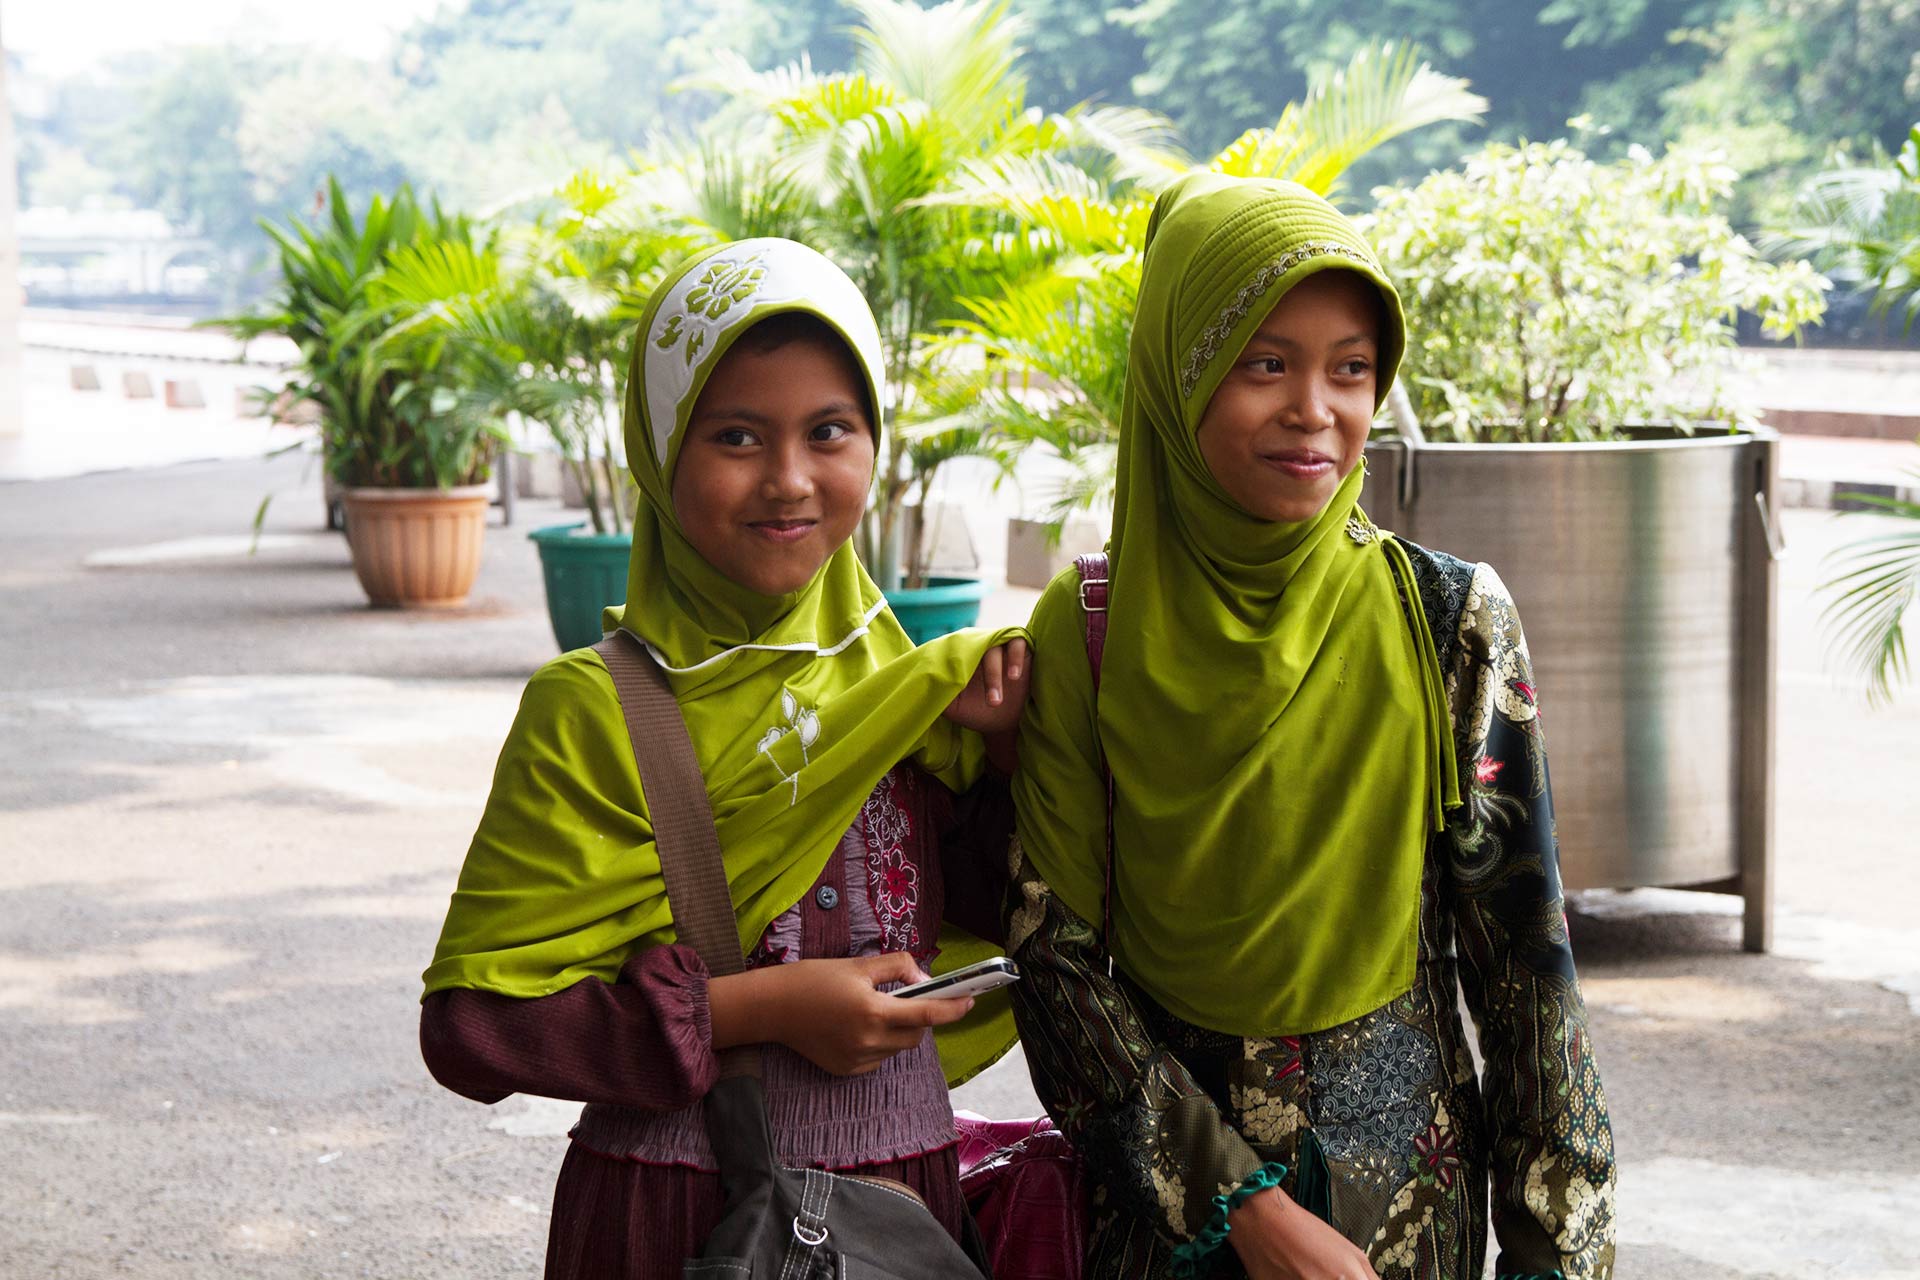 Girls at the Istiqlal Mosque (Independence Mosque), Jakarta, Java Island, Indonesia